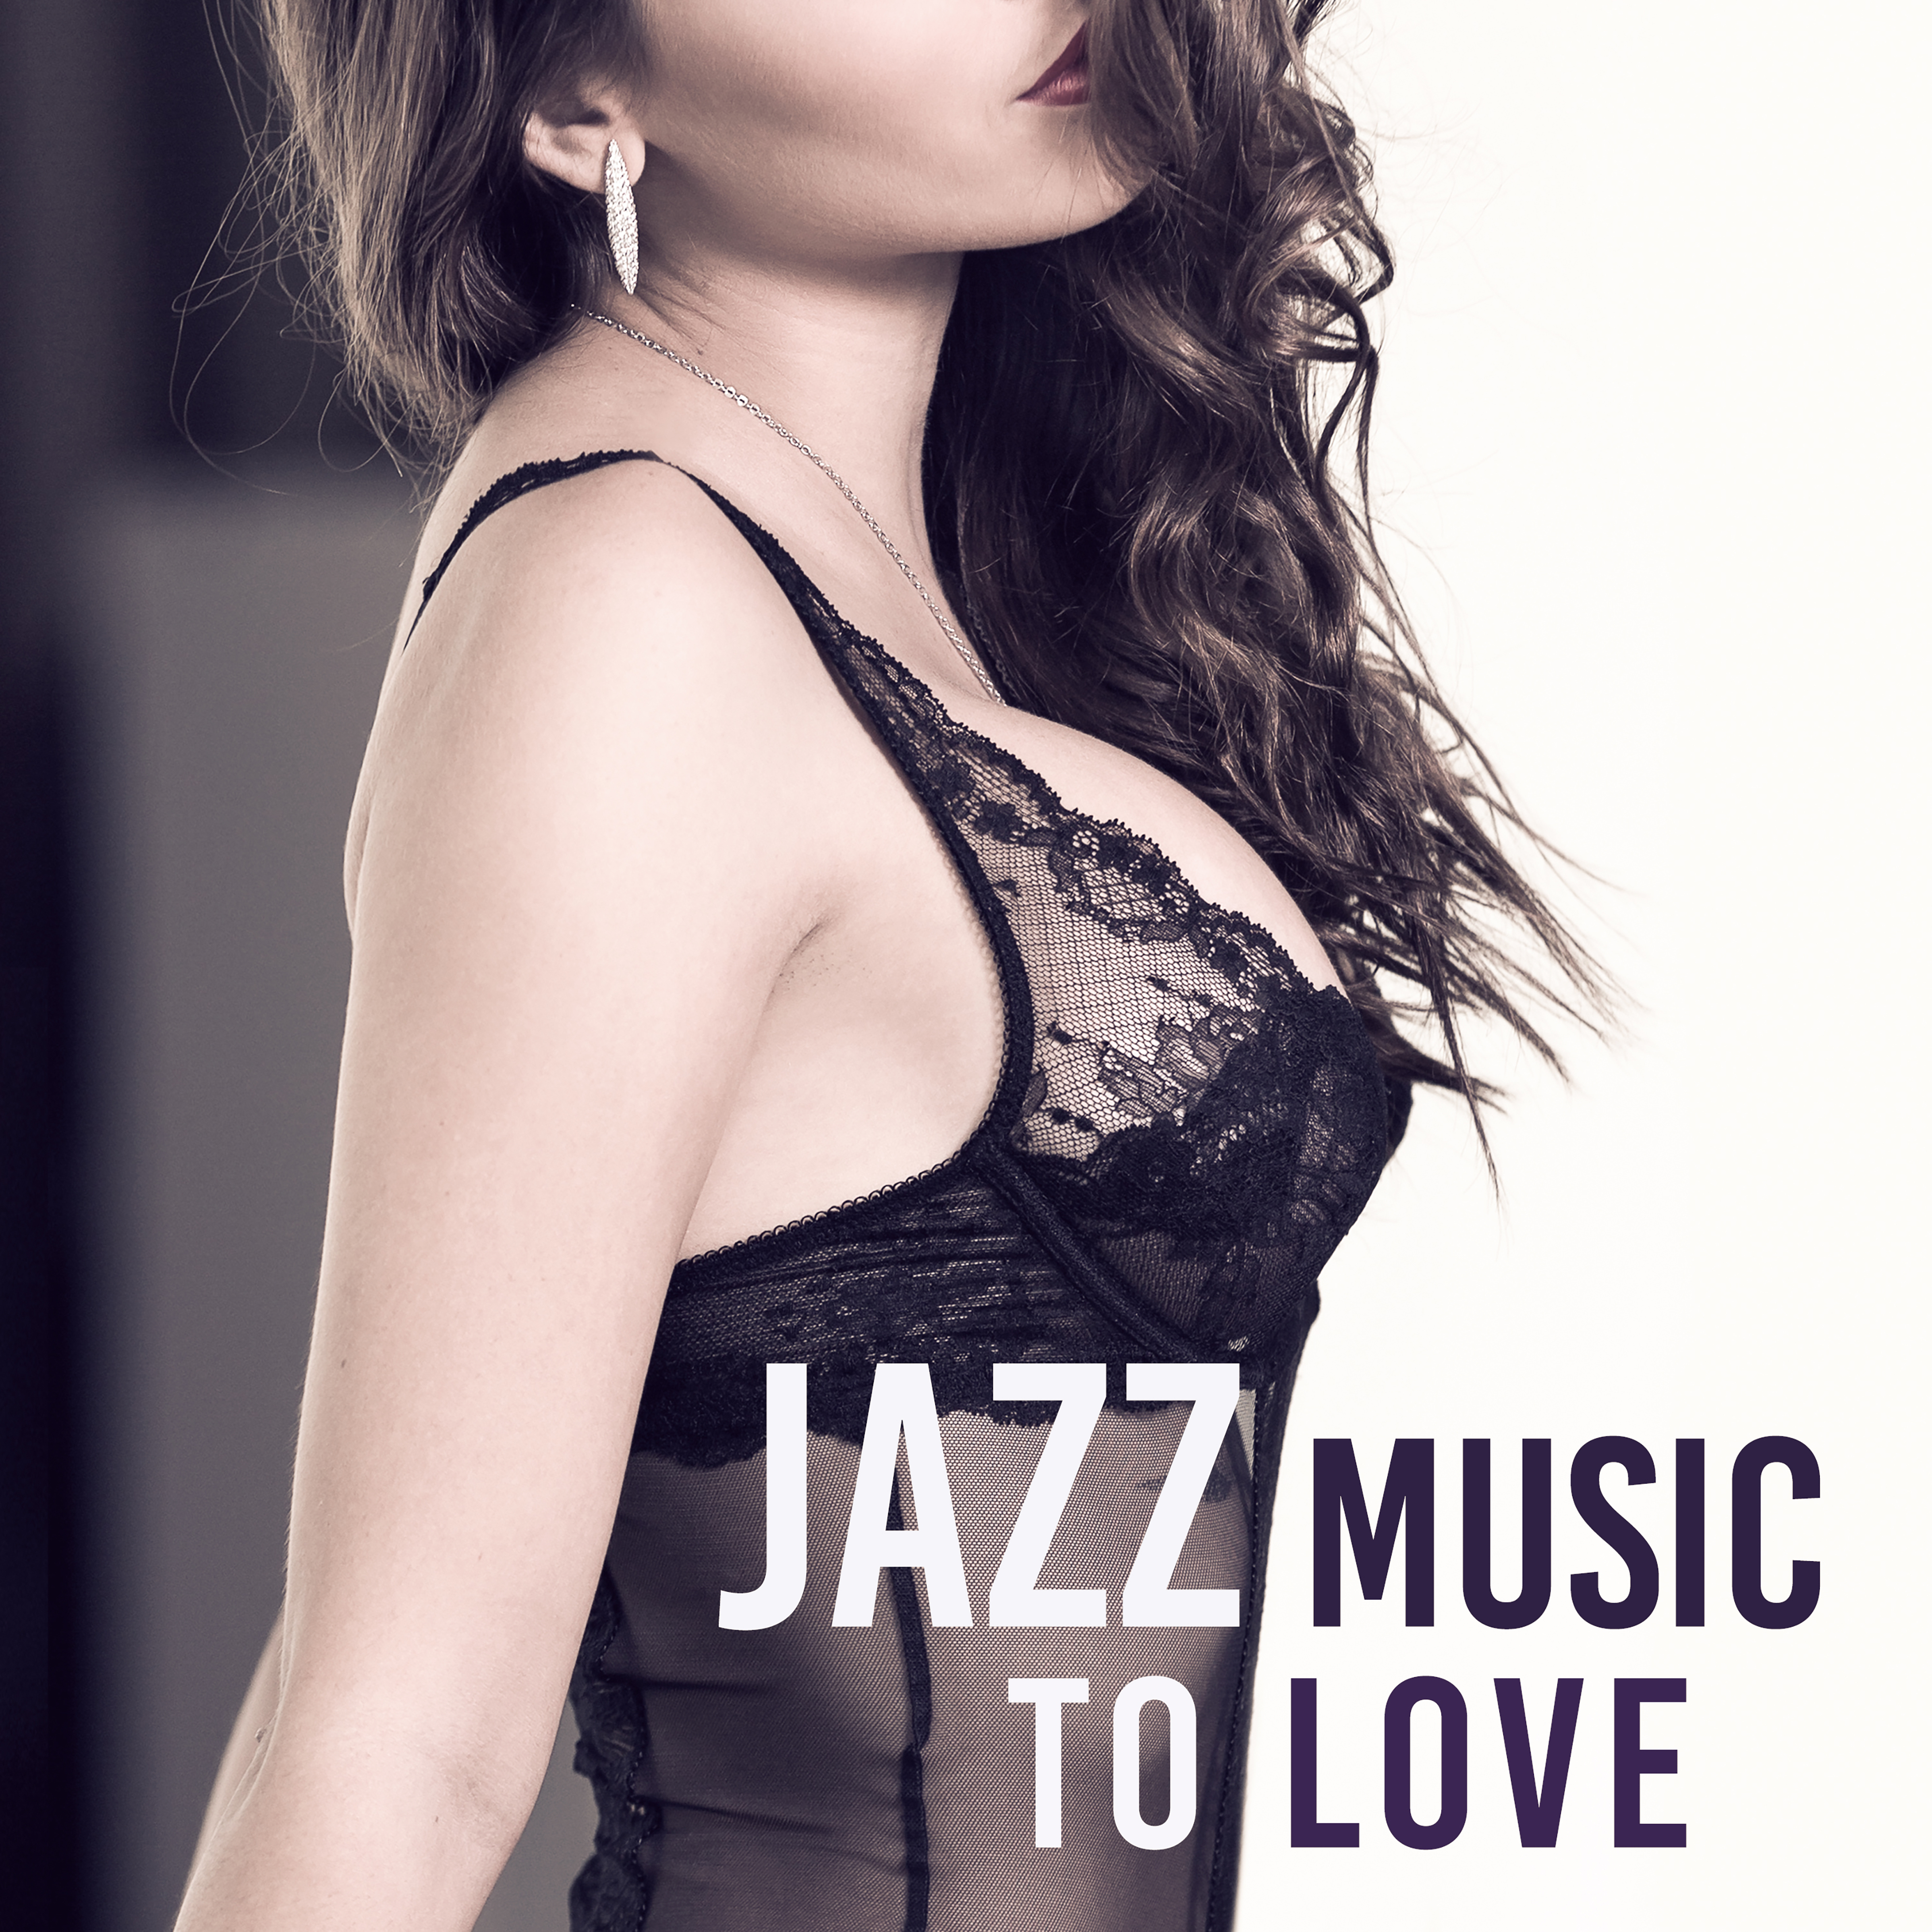 Jazz Music to Love – Calming Jazz for Romantic Evening, Soothing Jazz Music, Sounds to Rest, Sensual Piano Bar